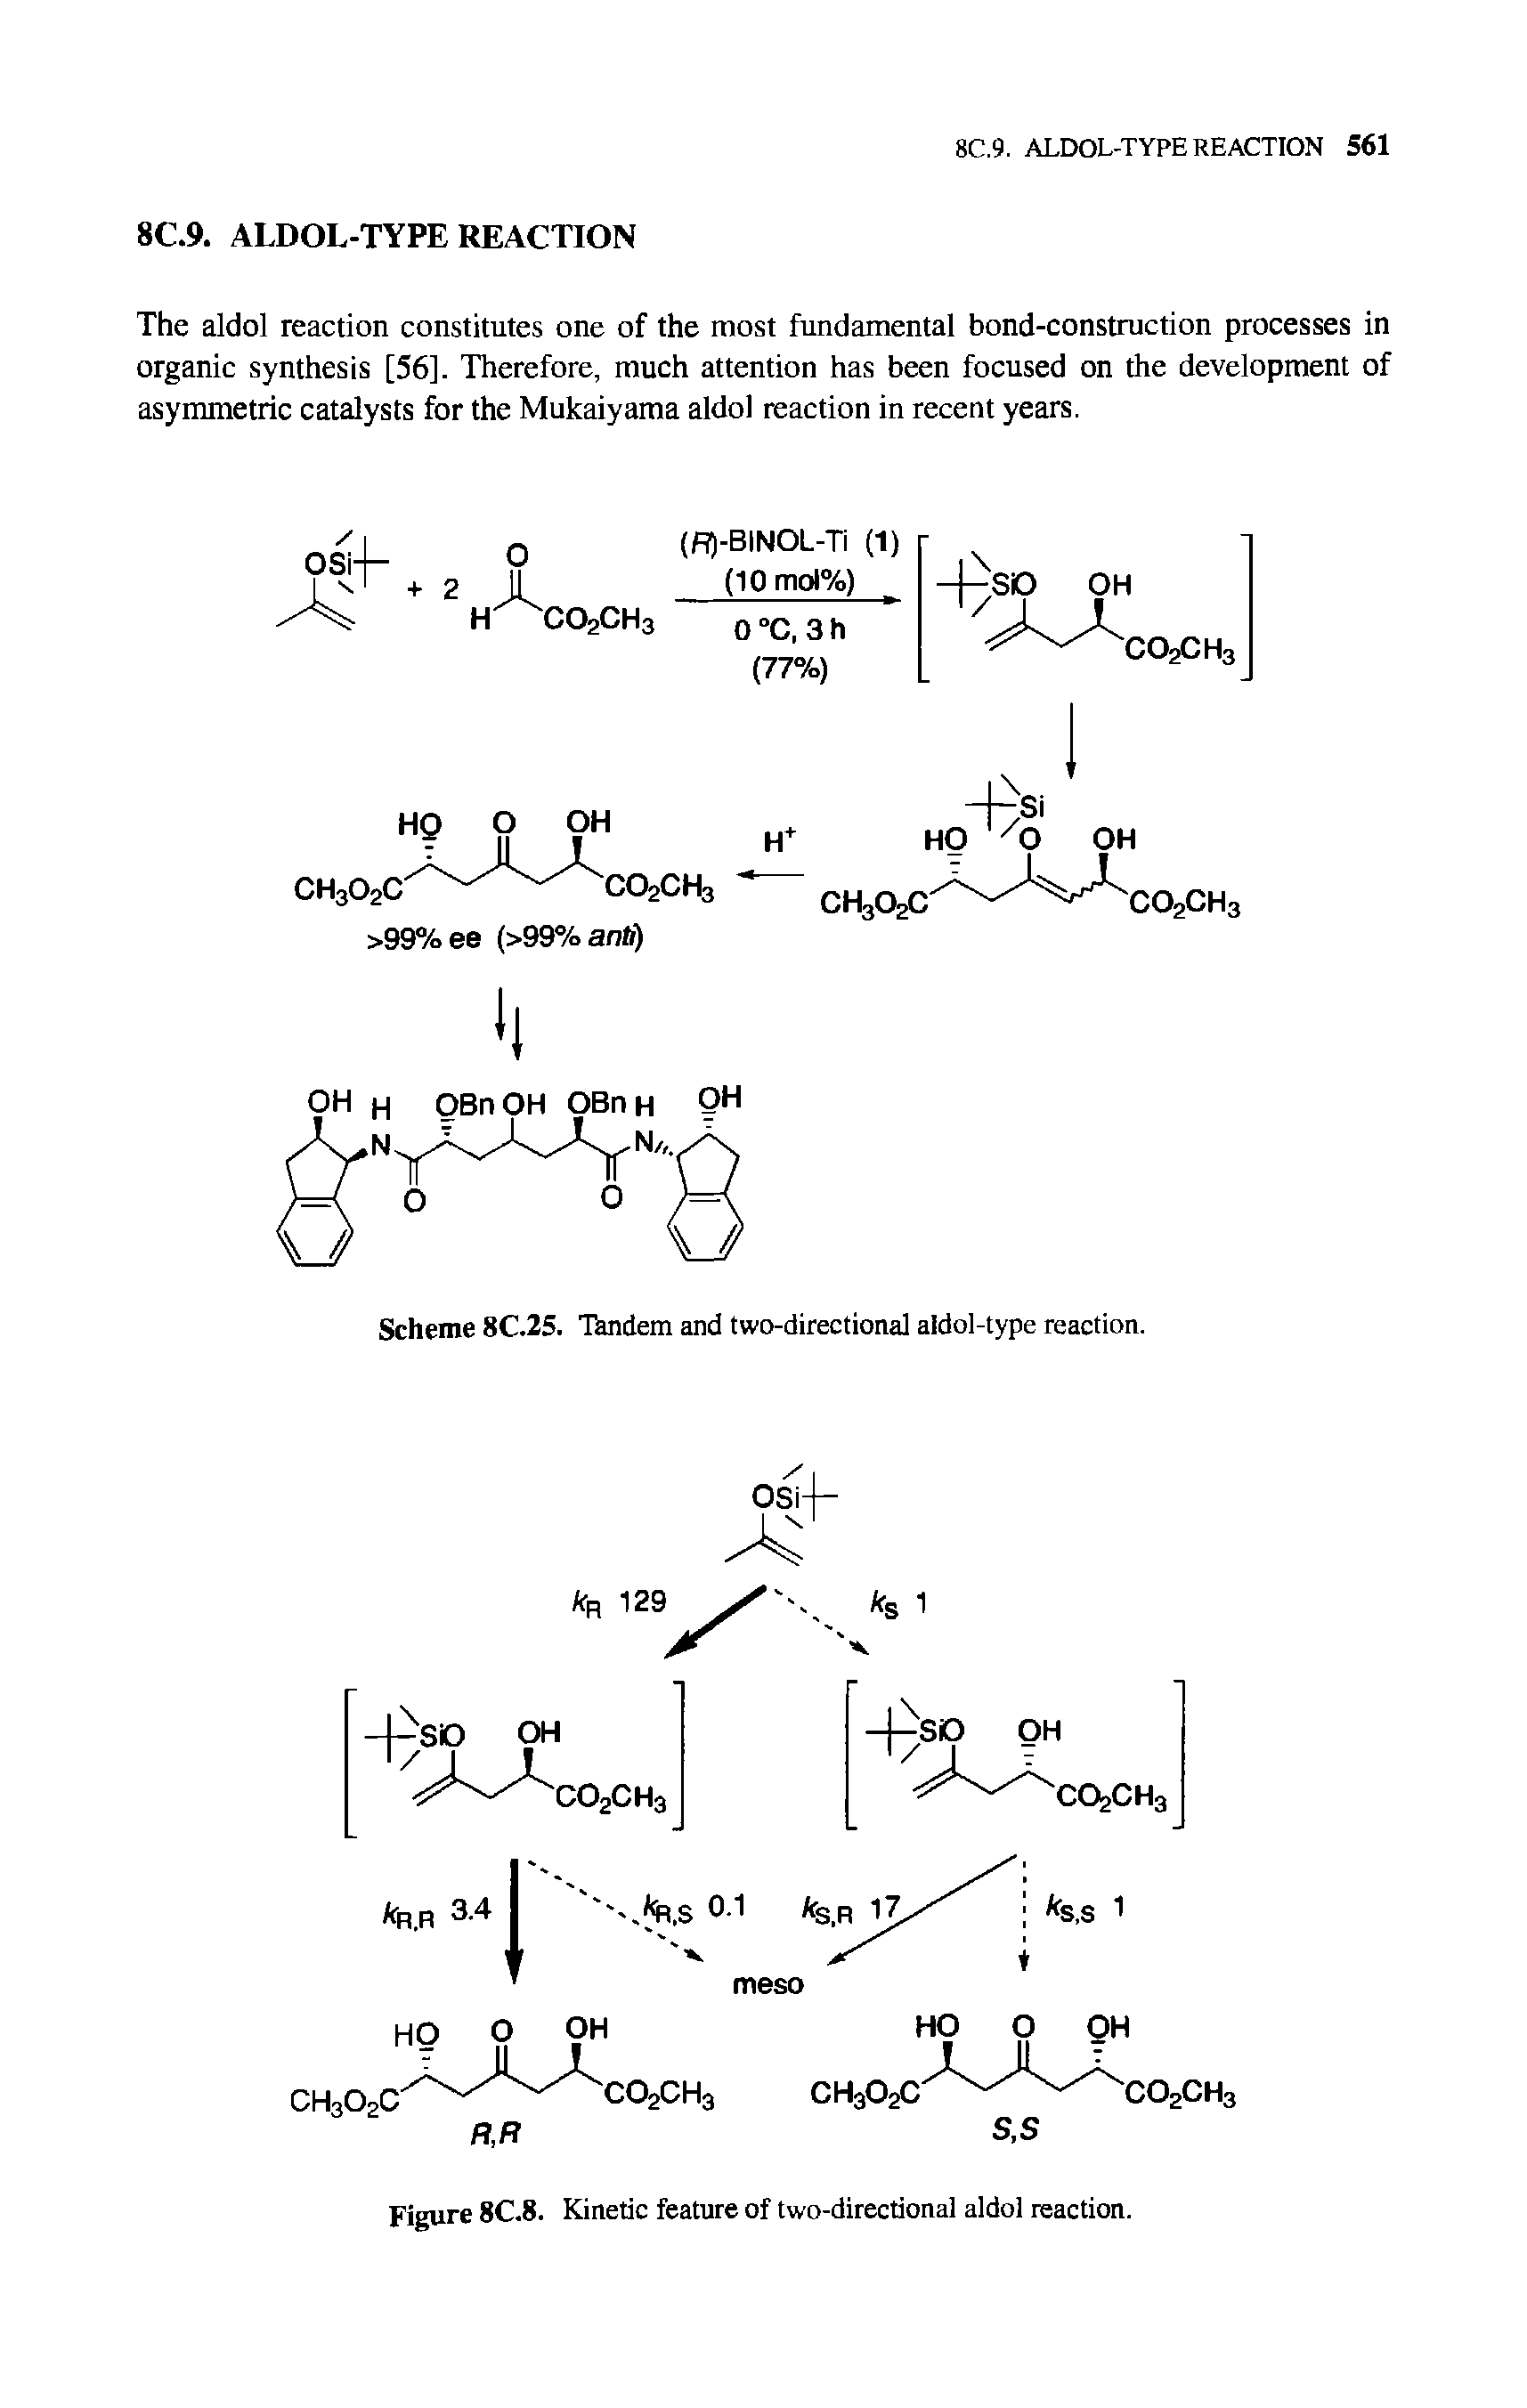 Figure 8C.8. Kinetic feature of two-directional aldol reaction.